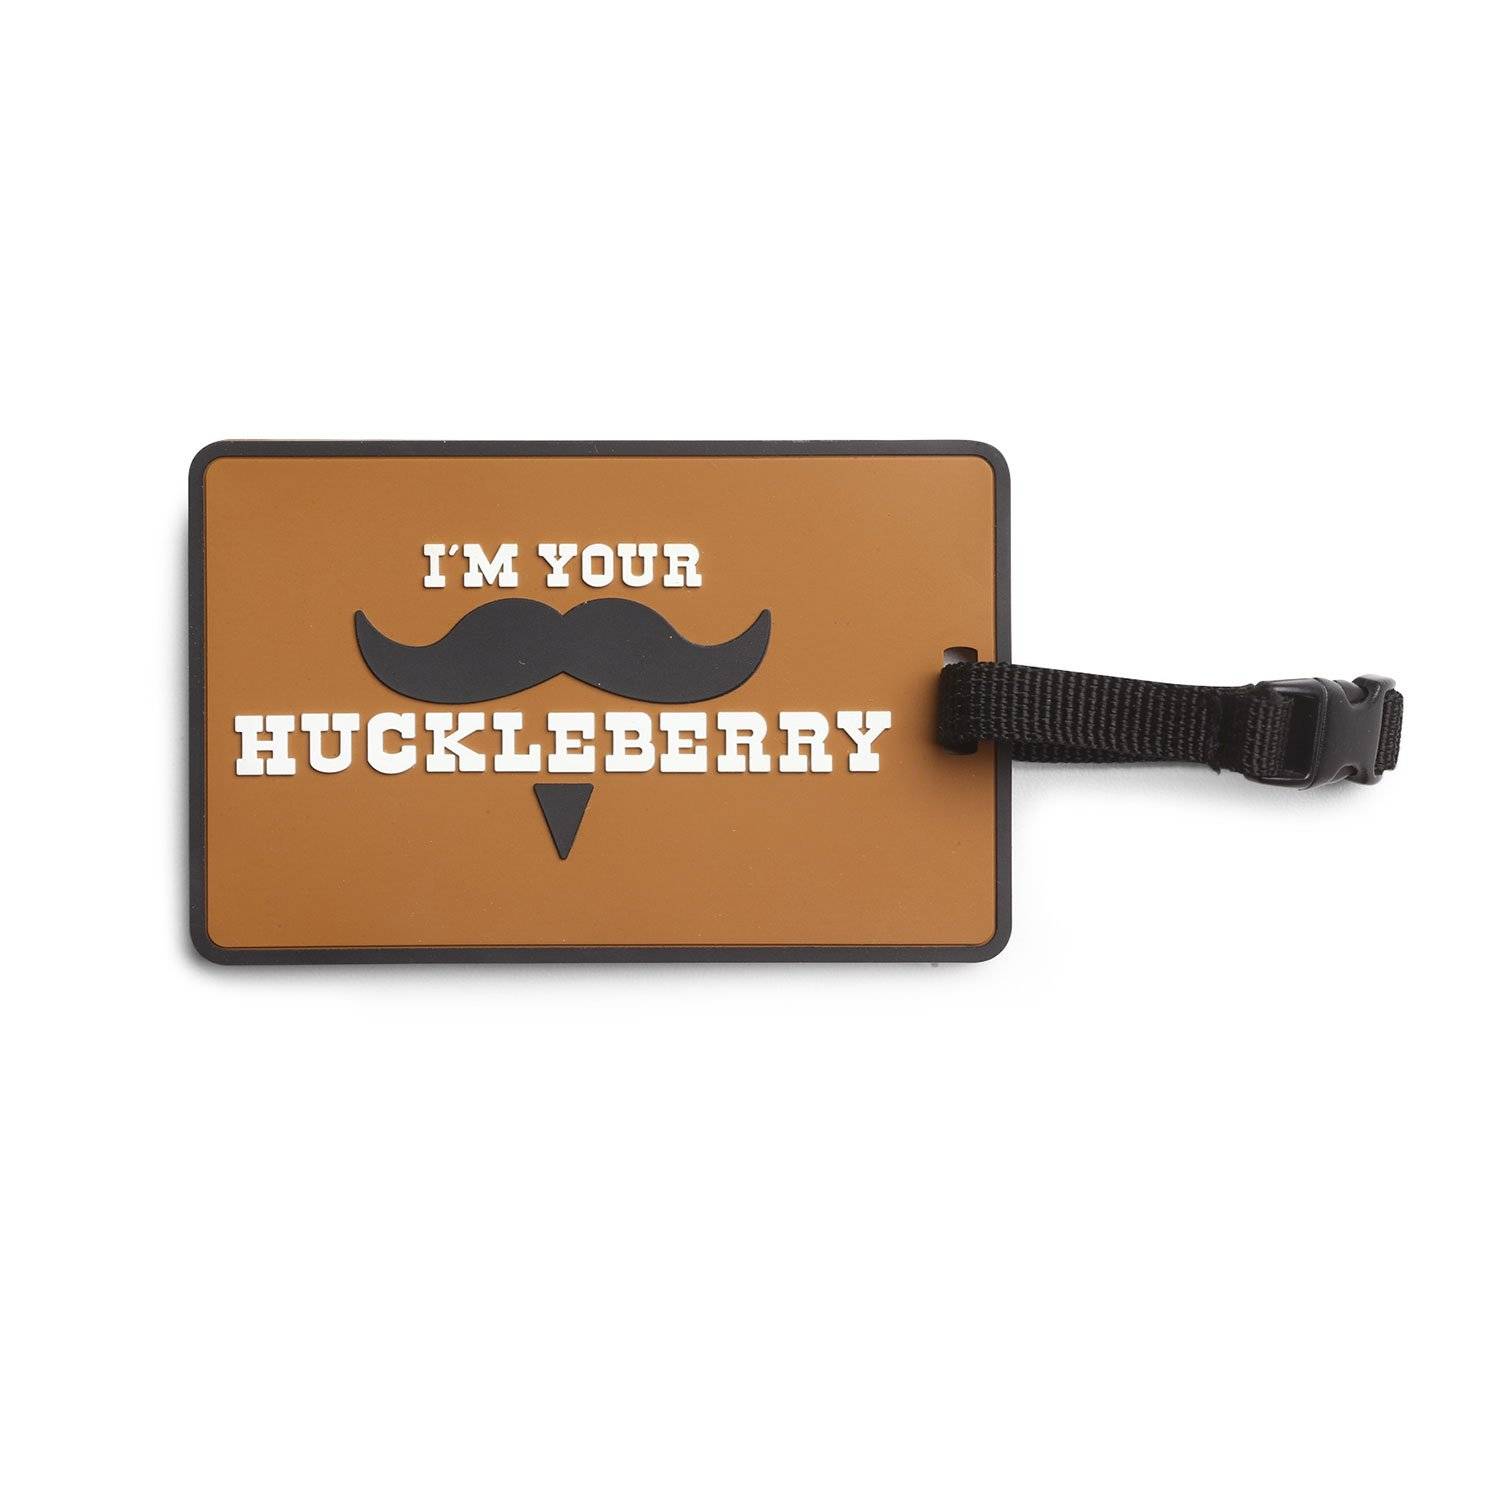 5ive Star Gear Im Your Huckleberry Luggage Tag